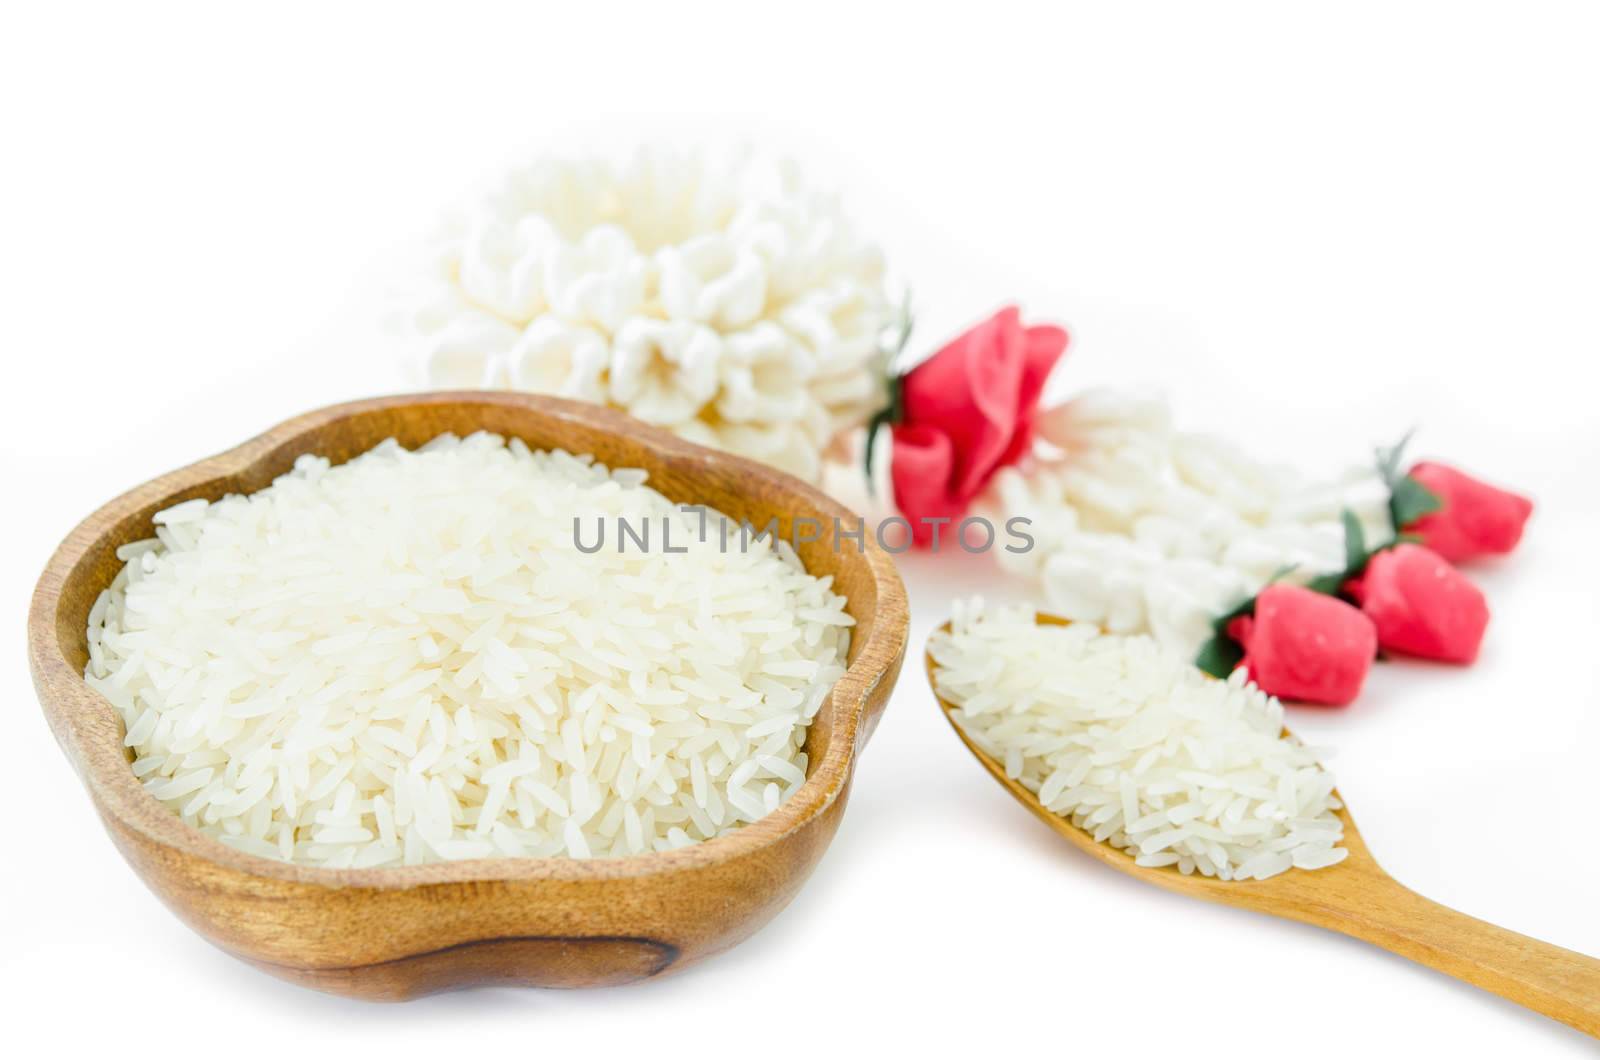 Raw white rice from Thailand in wooden bowl and spoon on white background.